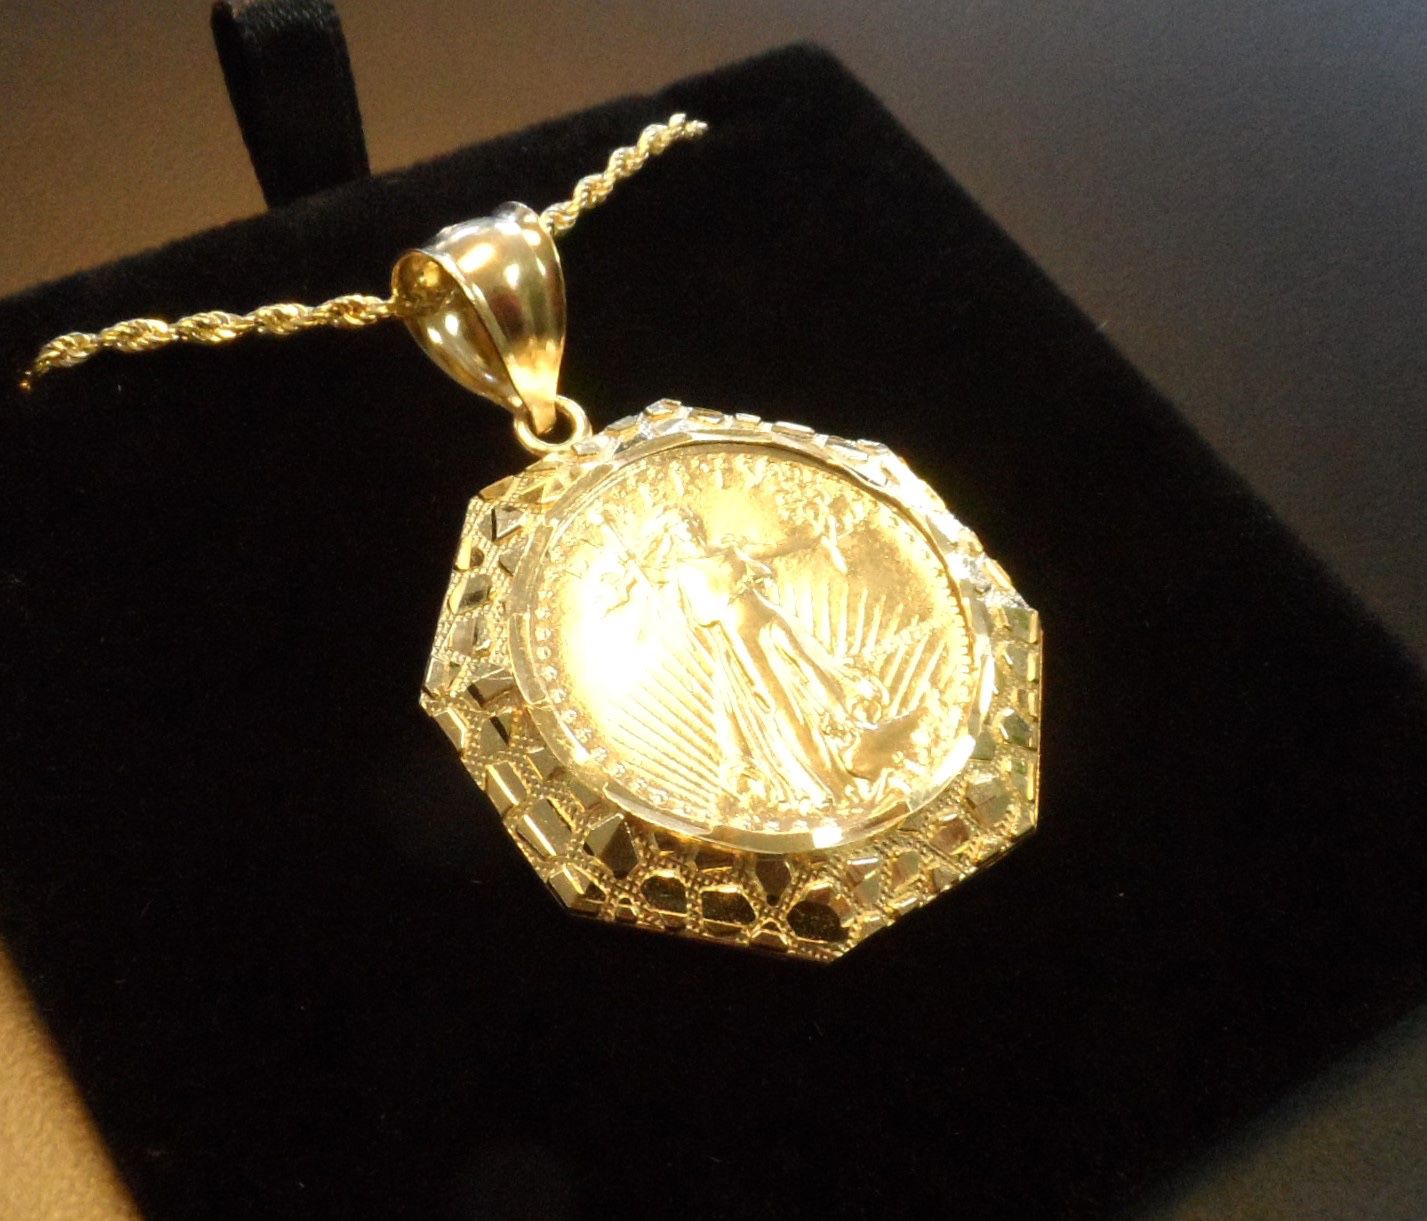 NEW 10K GOLD LIBERTY PENDANT WITH CHAIN 